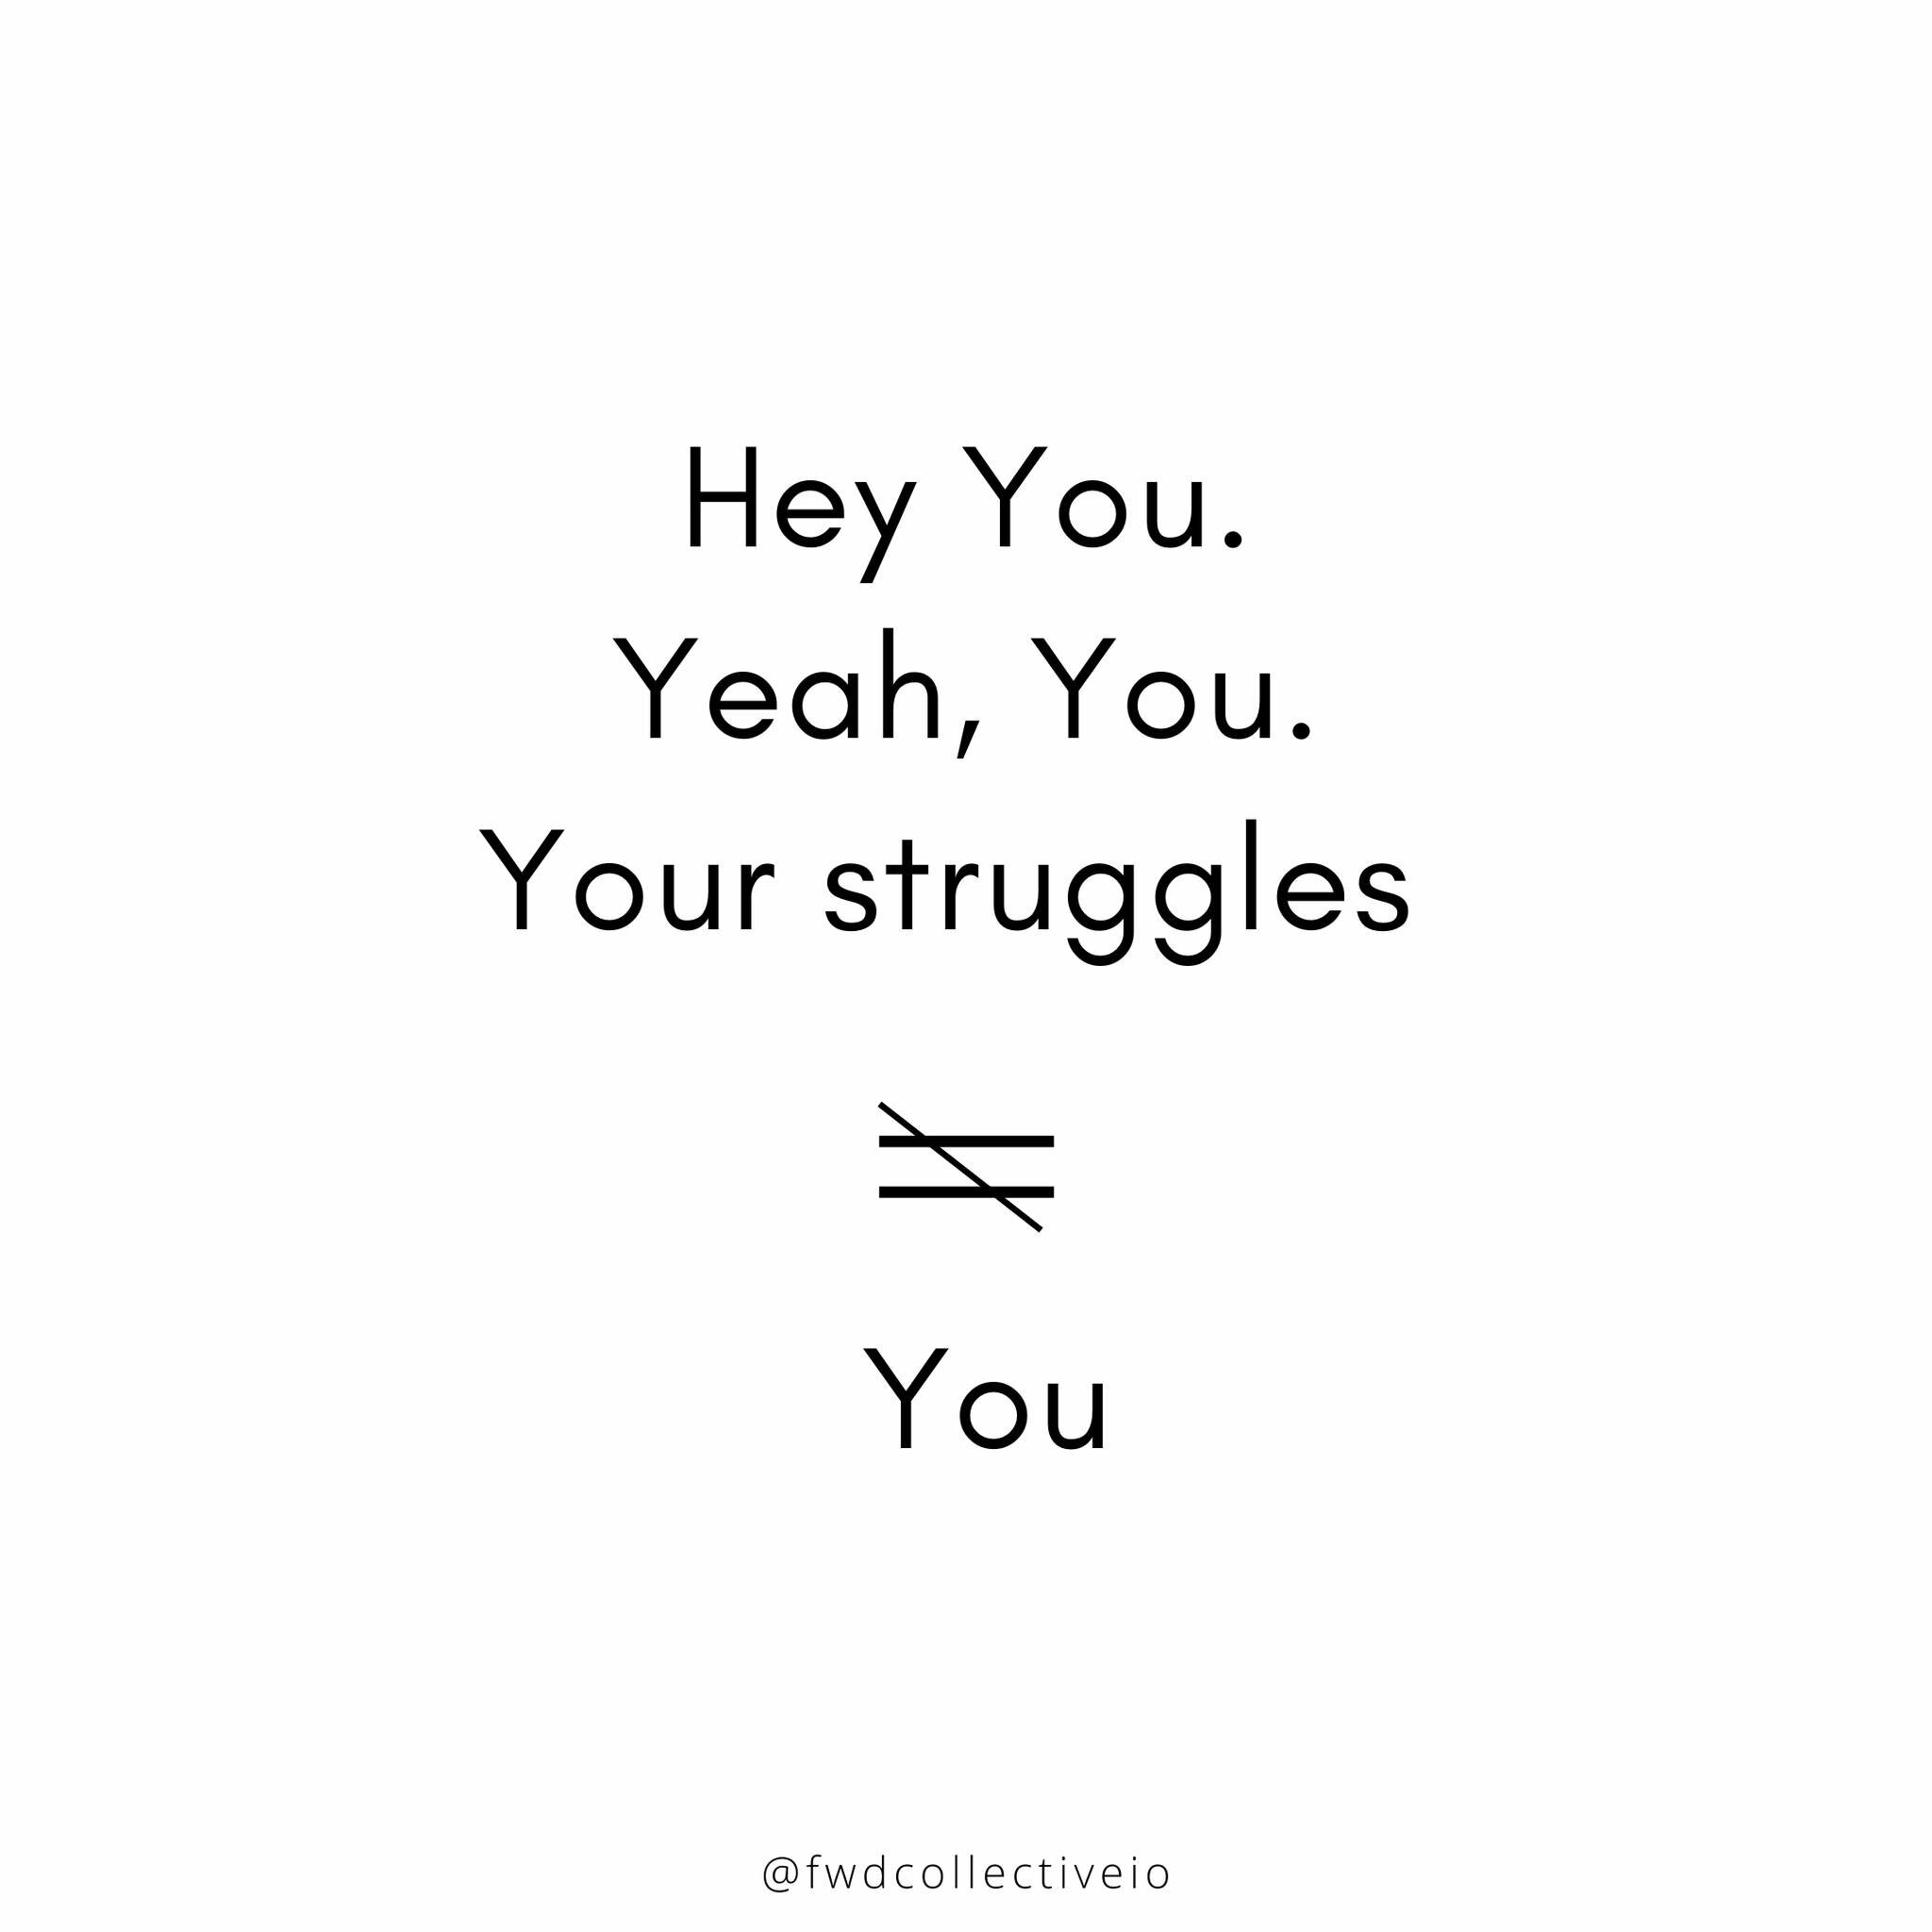 Hey You. Yeah, You. Your struggles do not equal You.

That's it. That's the post. 

Your struggles do NOT equal You.

You got this 🙌🏿🙌🏻🙌🏾🙌🏽